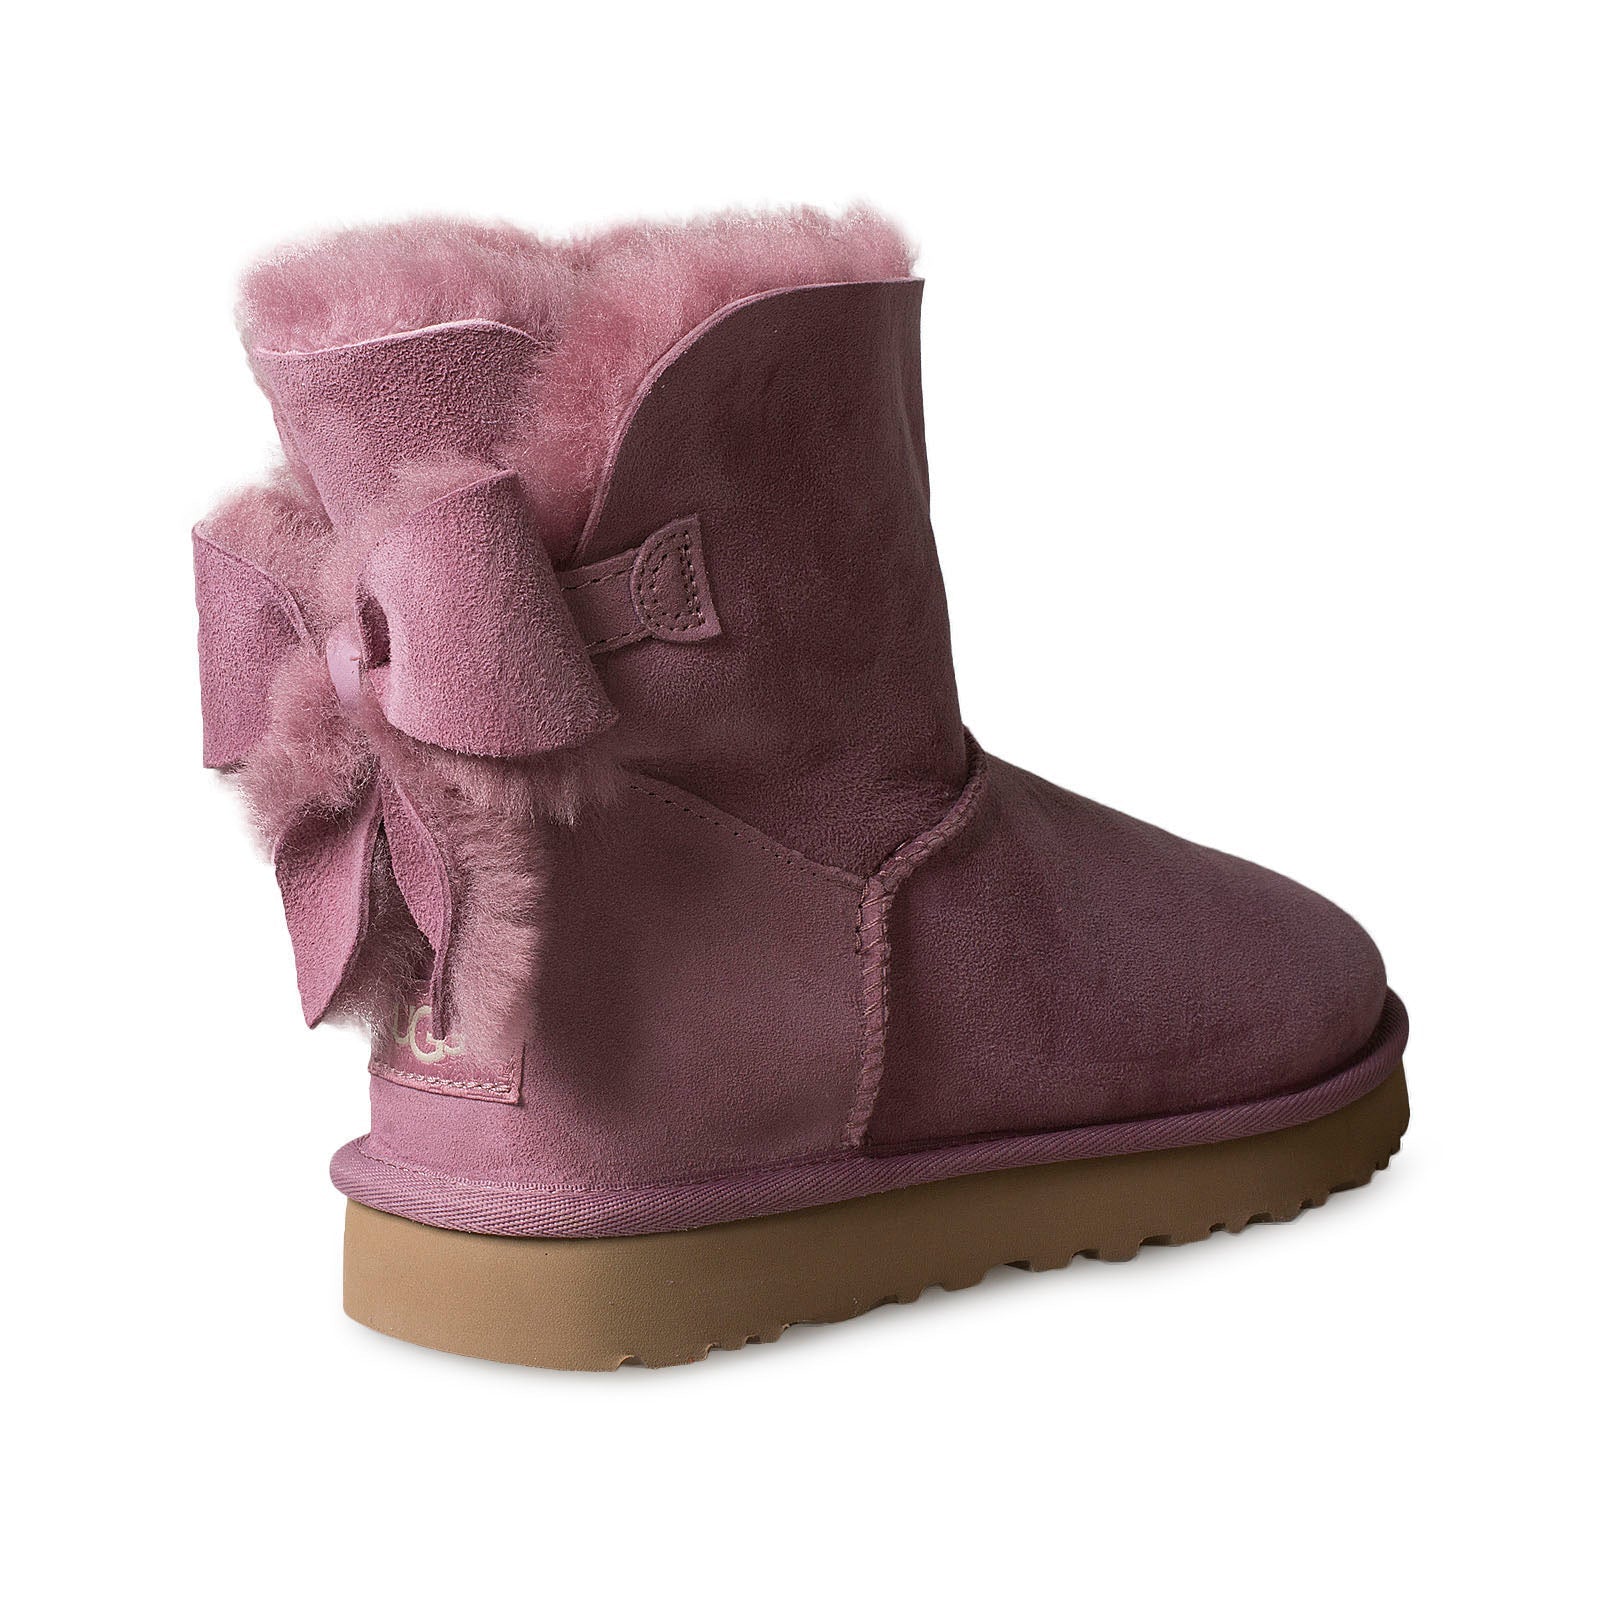 UGG Classic Heritage Bow Urchin Boots - Women's